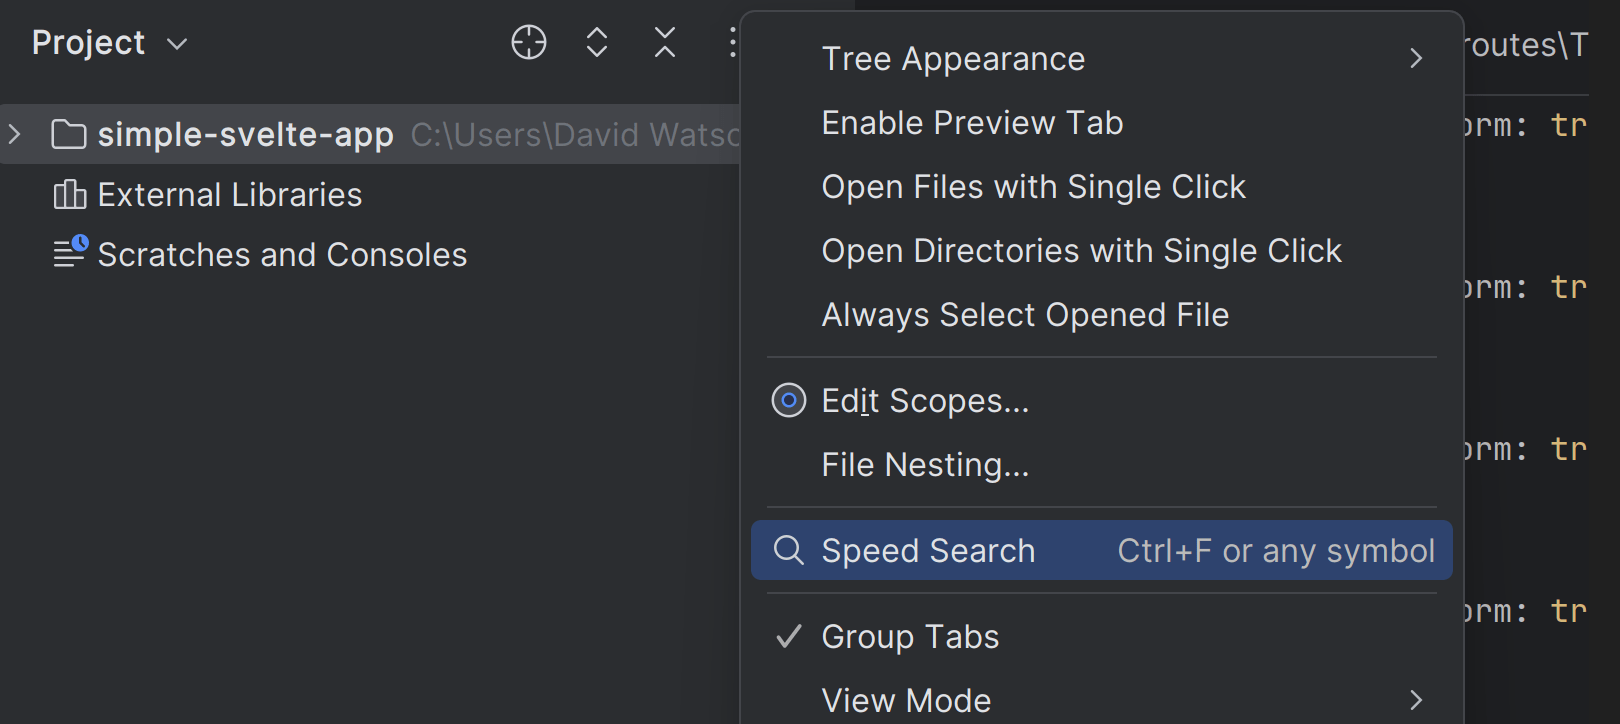 Speed Search shortcut